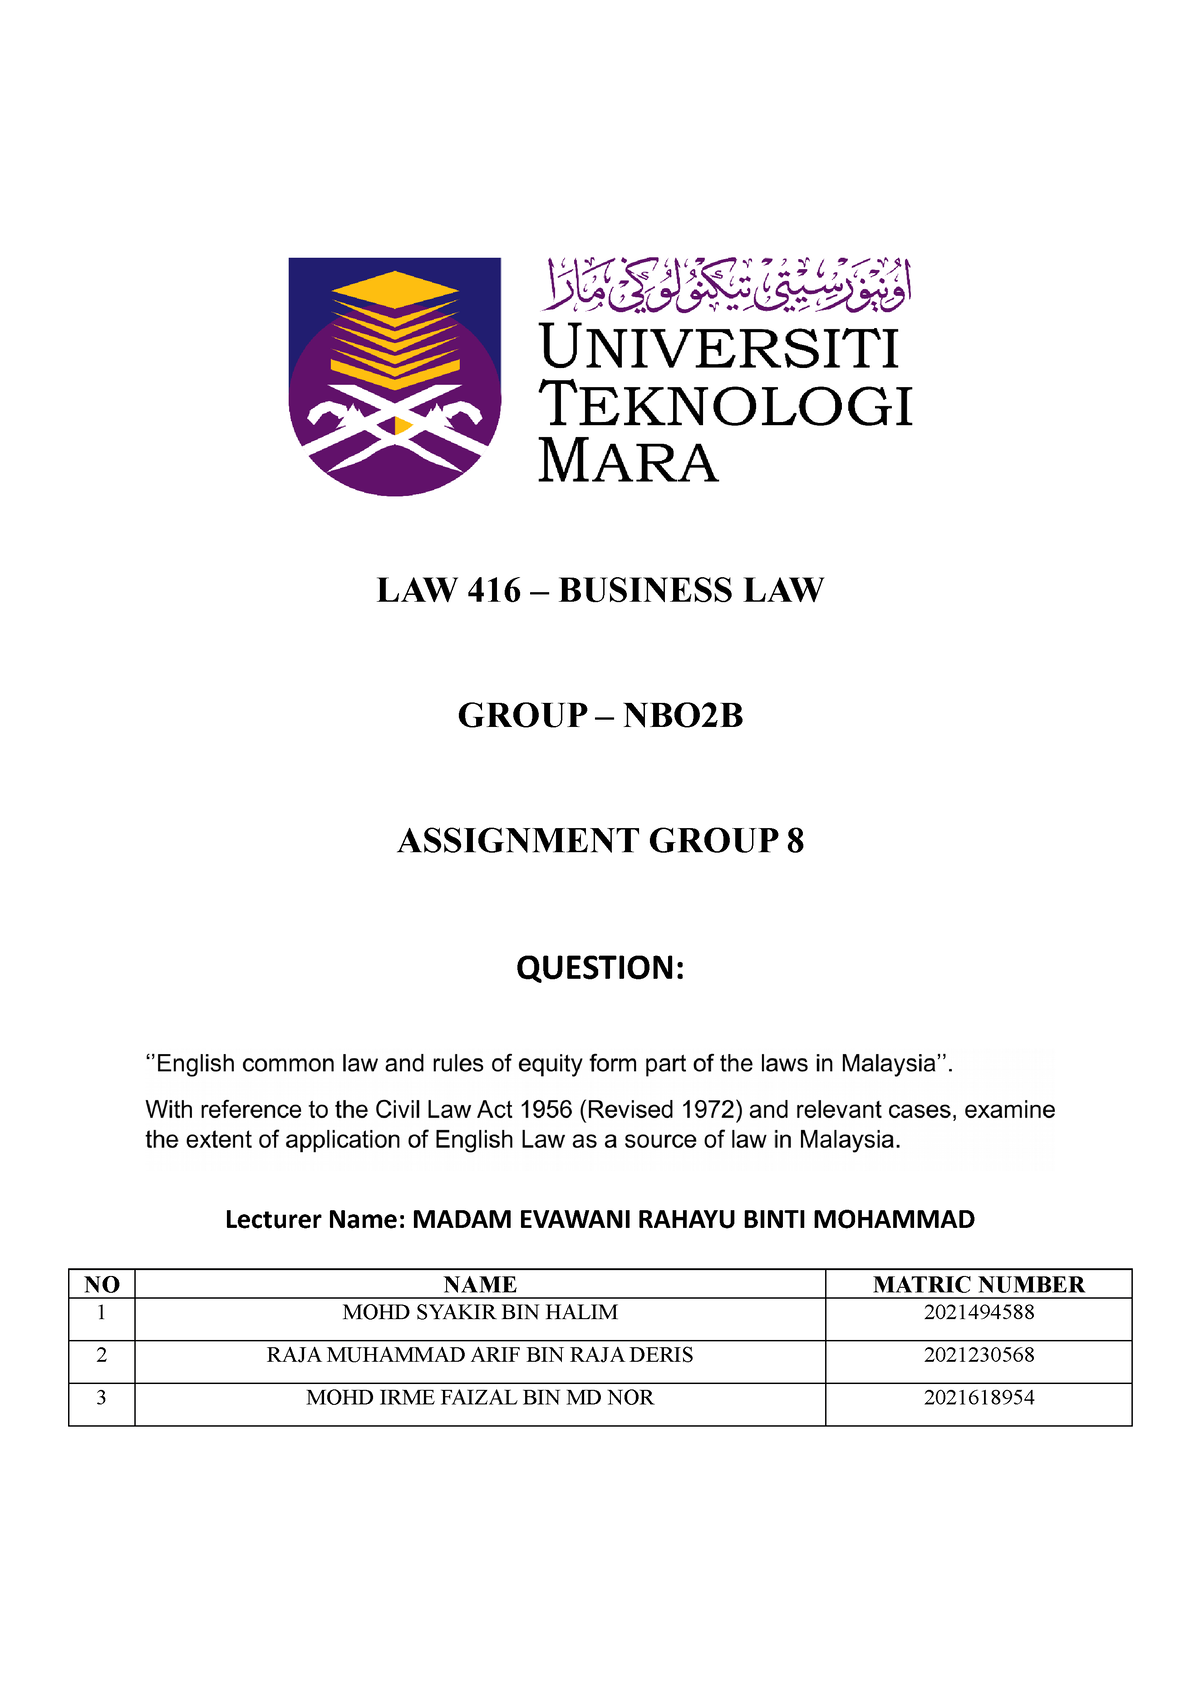 group assignment law416